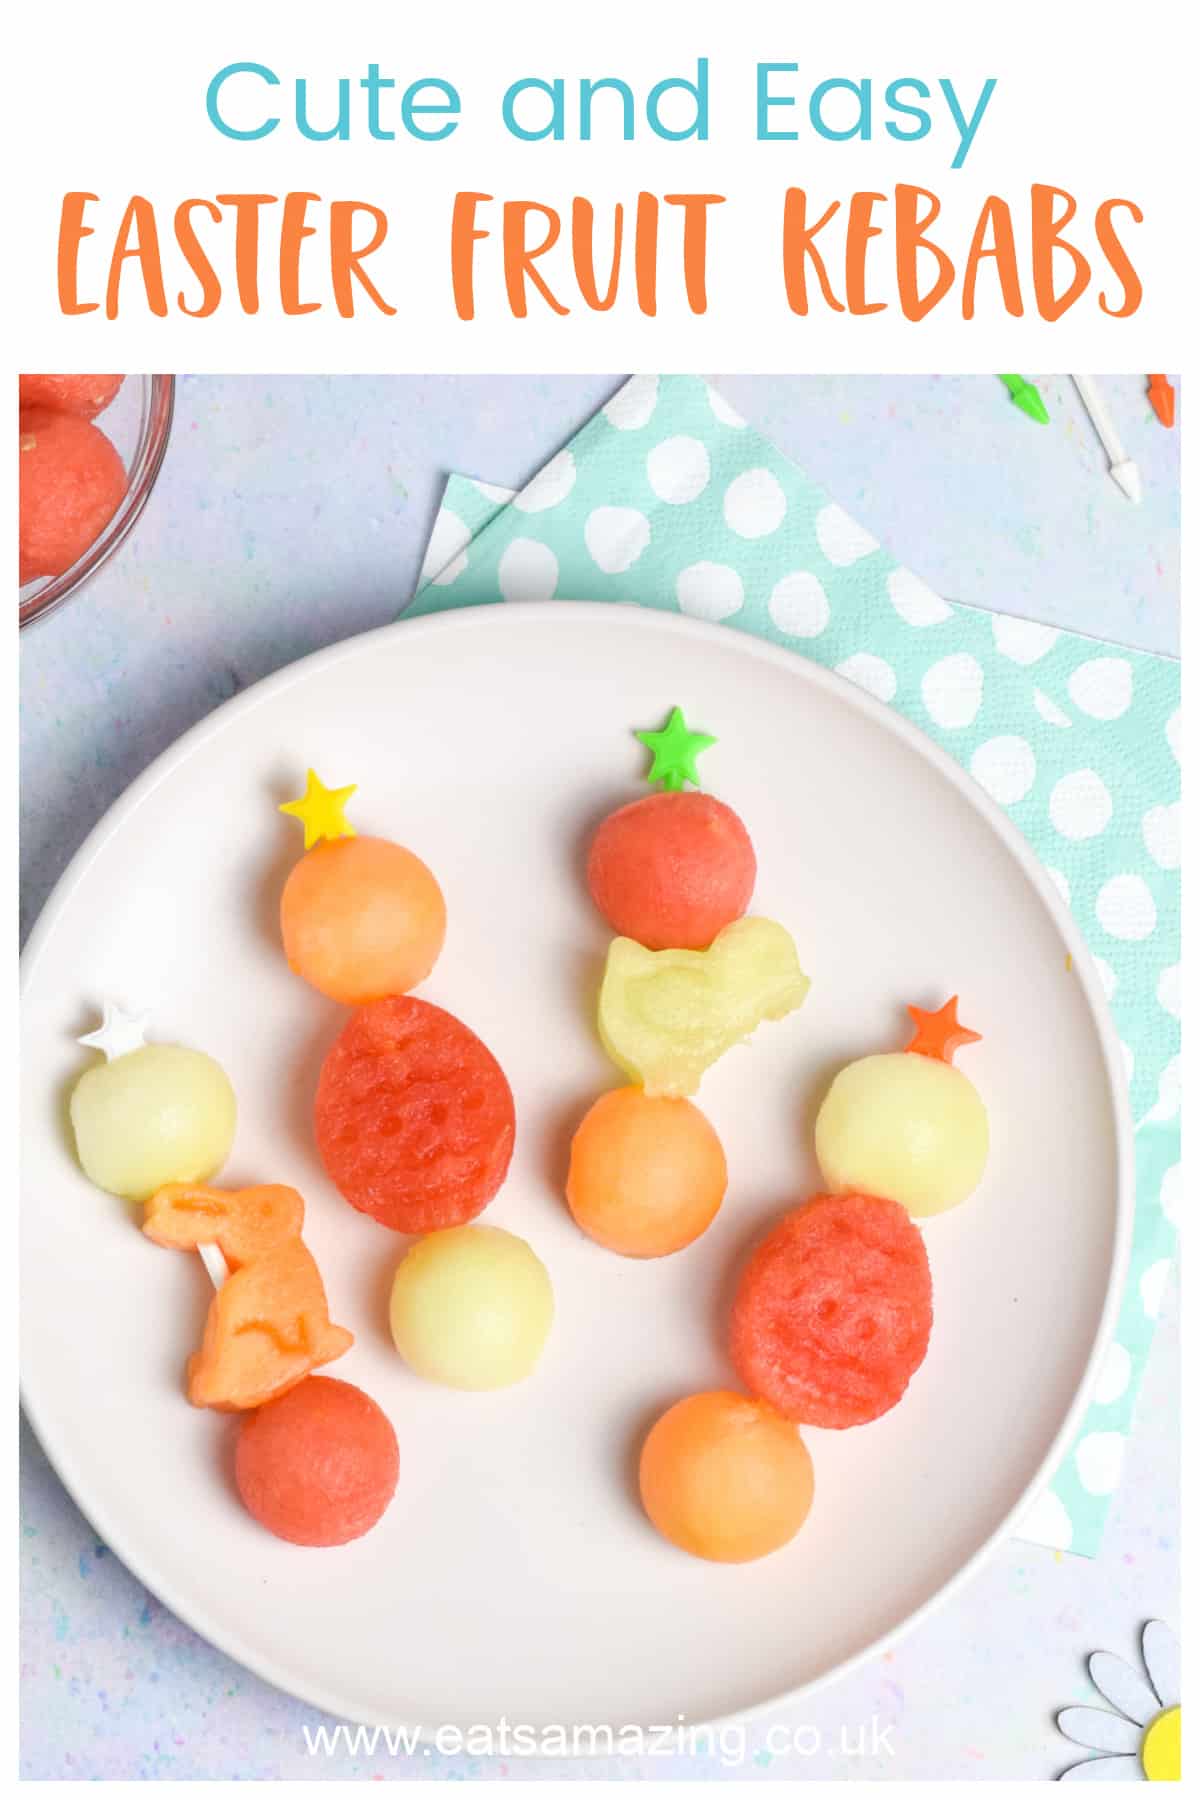 Fun and easy Easter fruit kebabs - healthy Easter food for kids